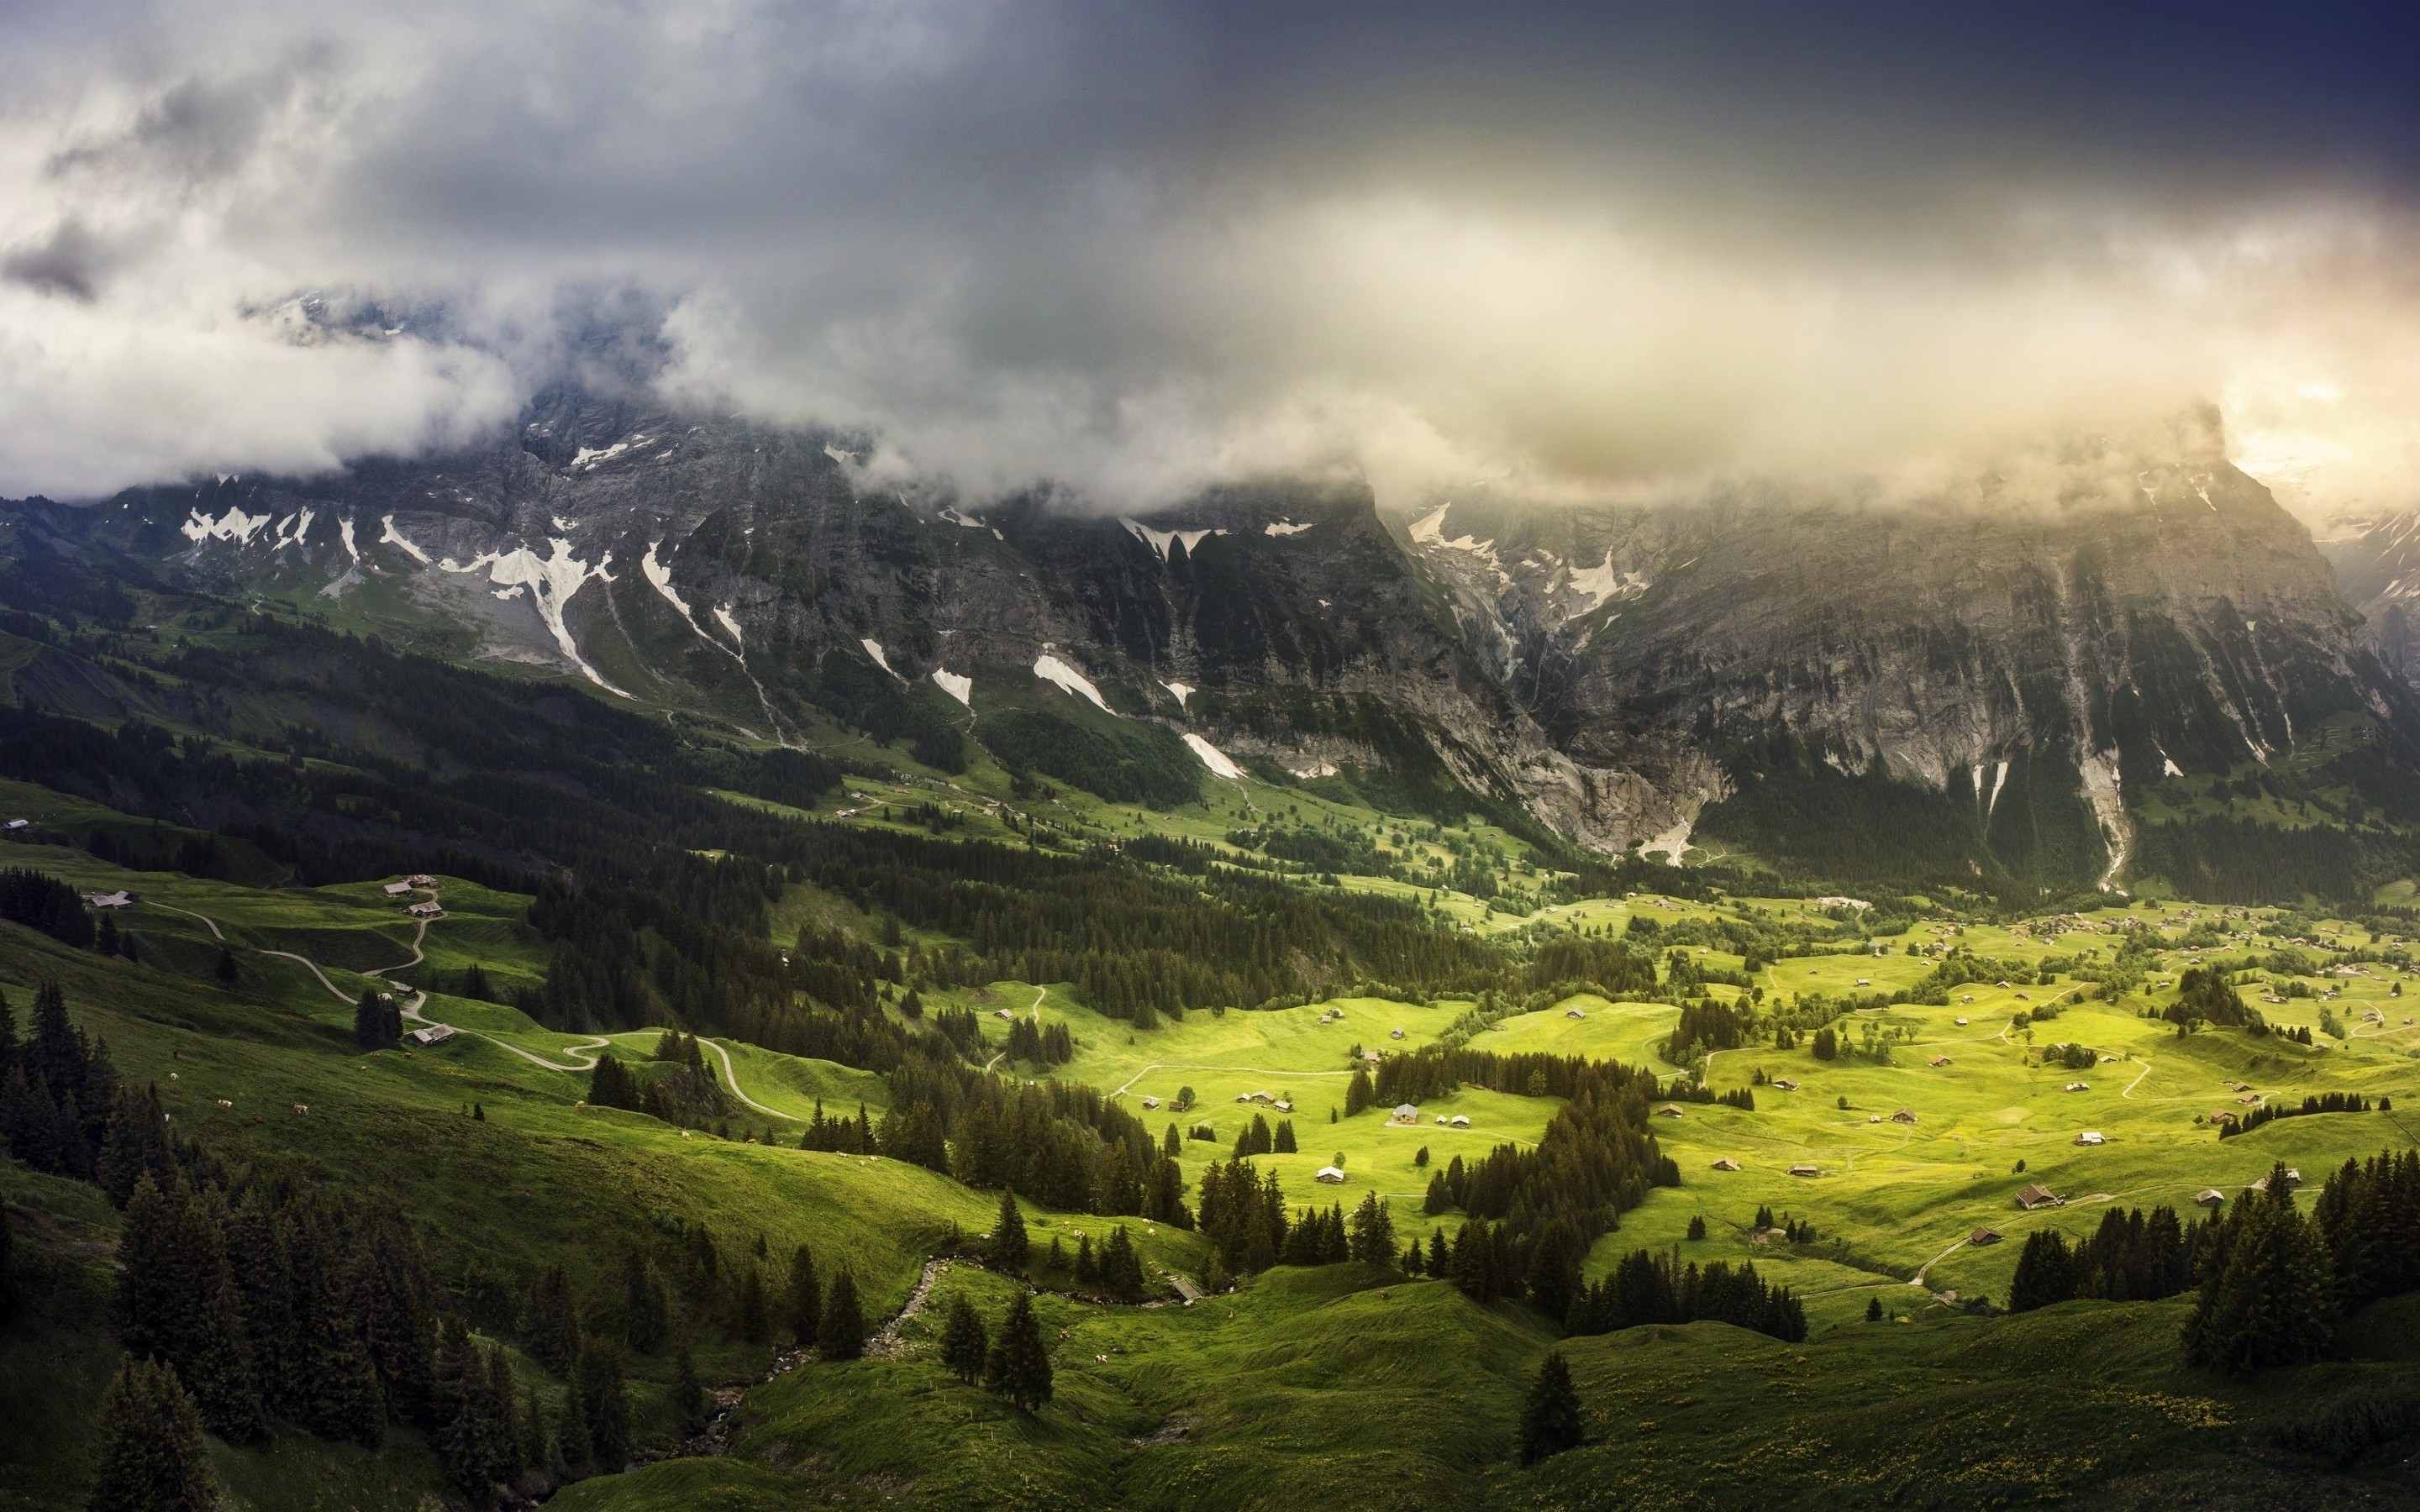 General 2880x1800 landscape nature mountains Switzerland trees clouds valley